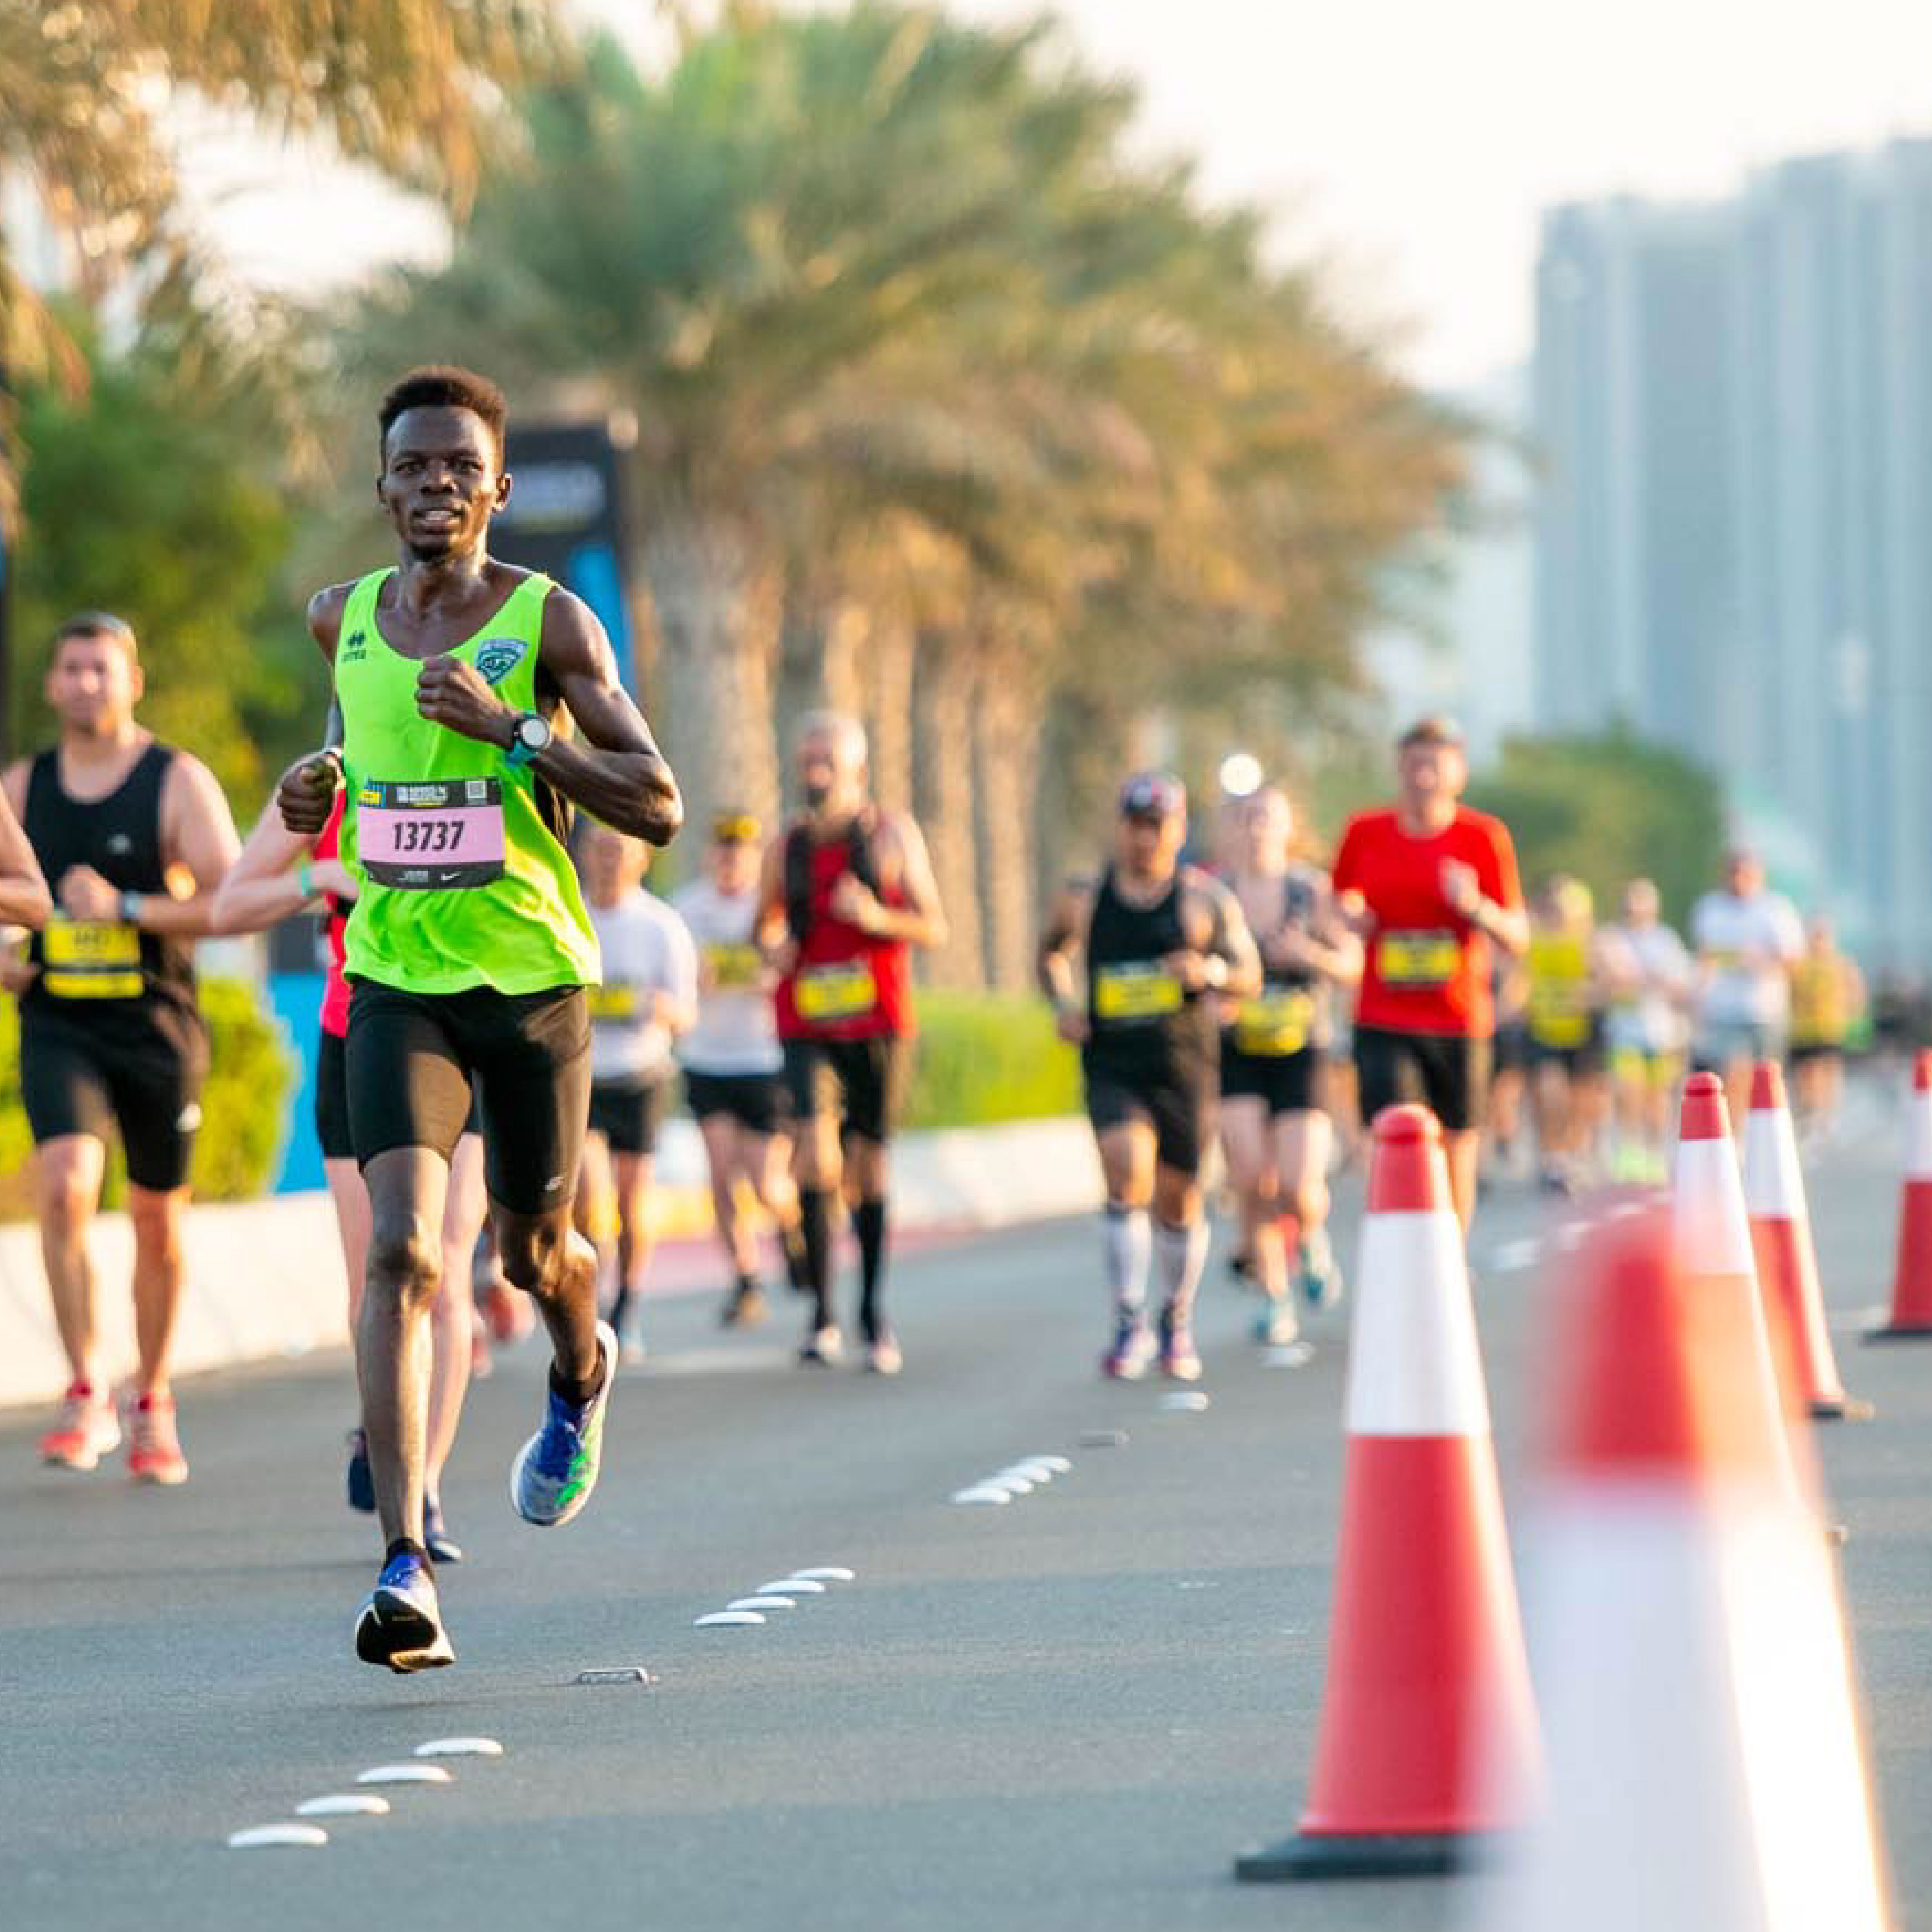 ADNOC Abu Dhabi Marathon Returns in December With a Commitment to Grow